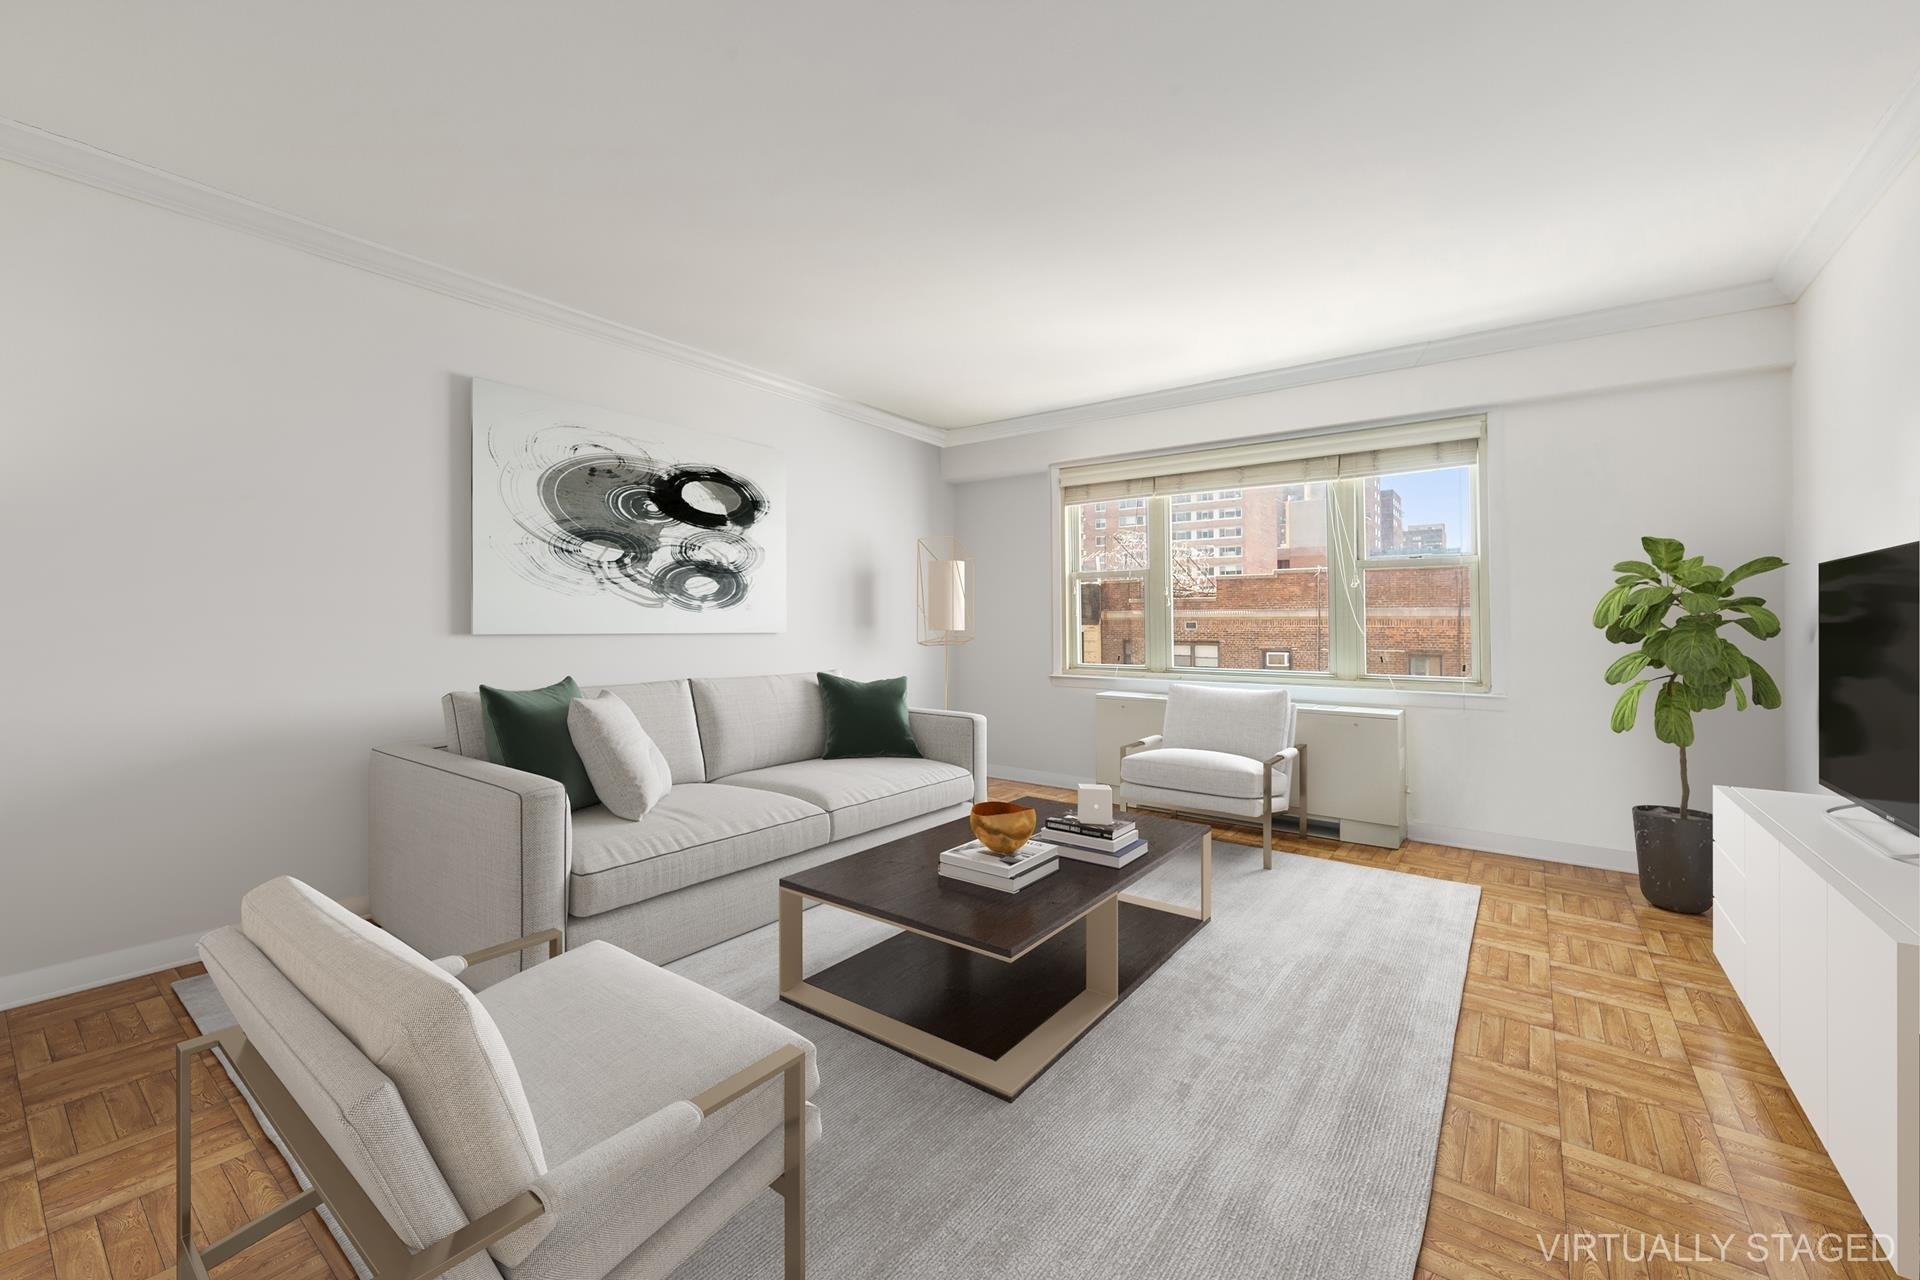 Co-op Properties for Sale at 333 E 66TH ST, 8J Lenox Hill, New York, New York 10065